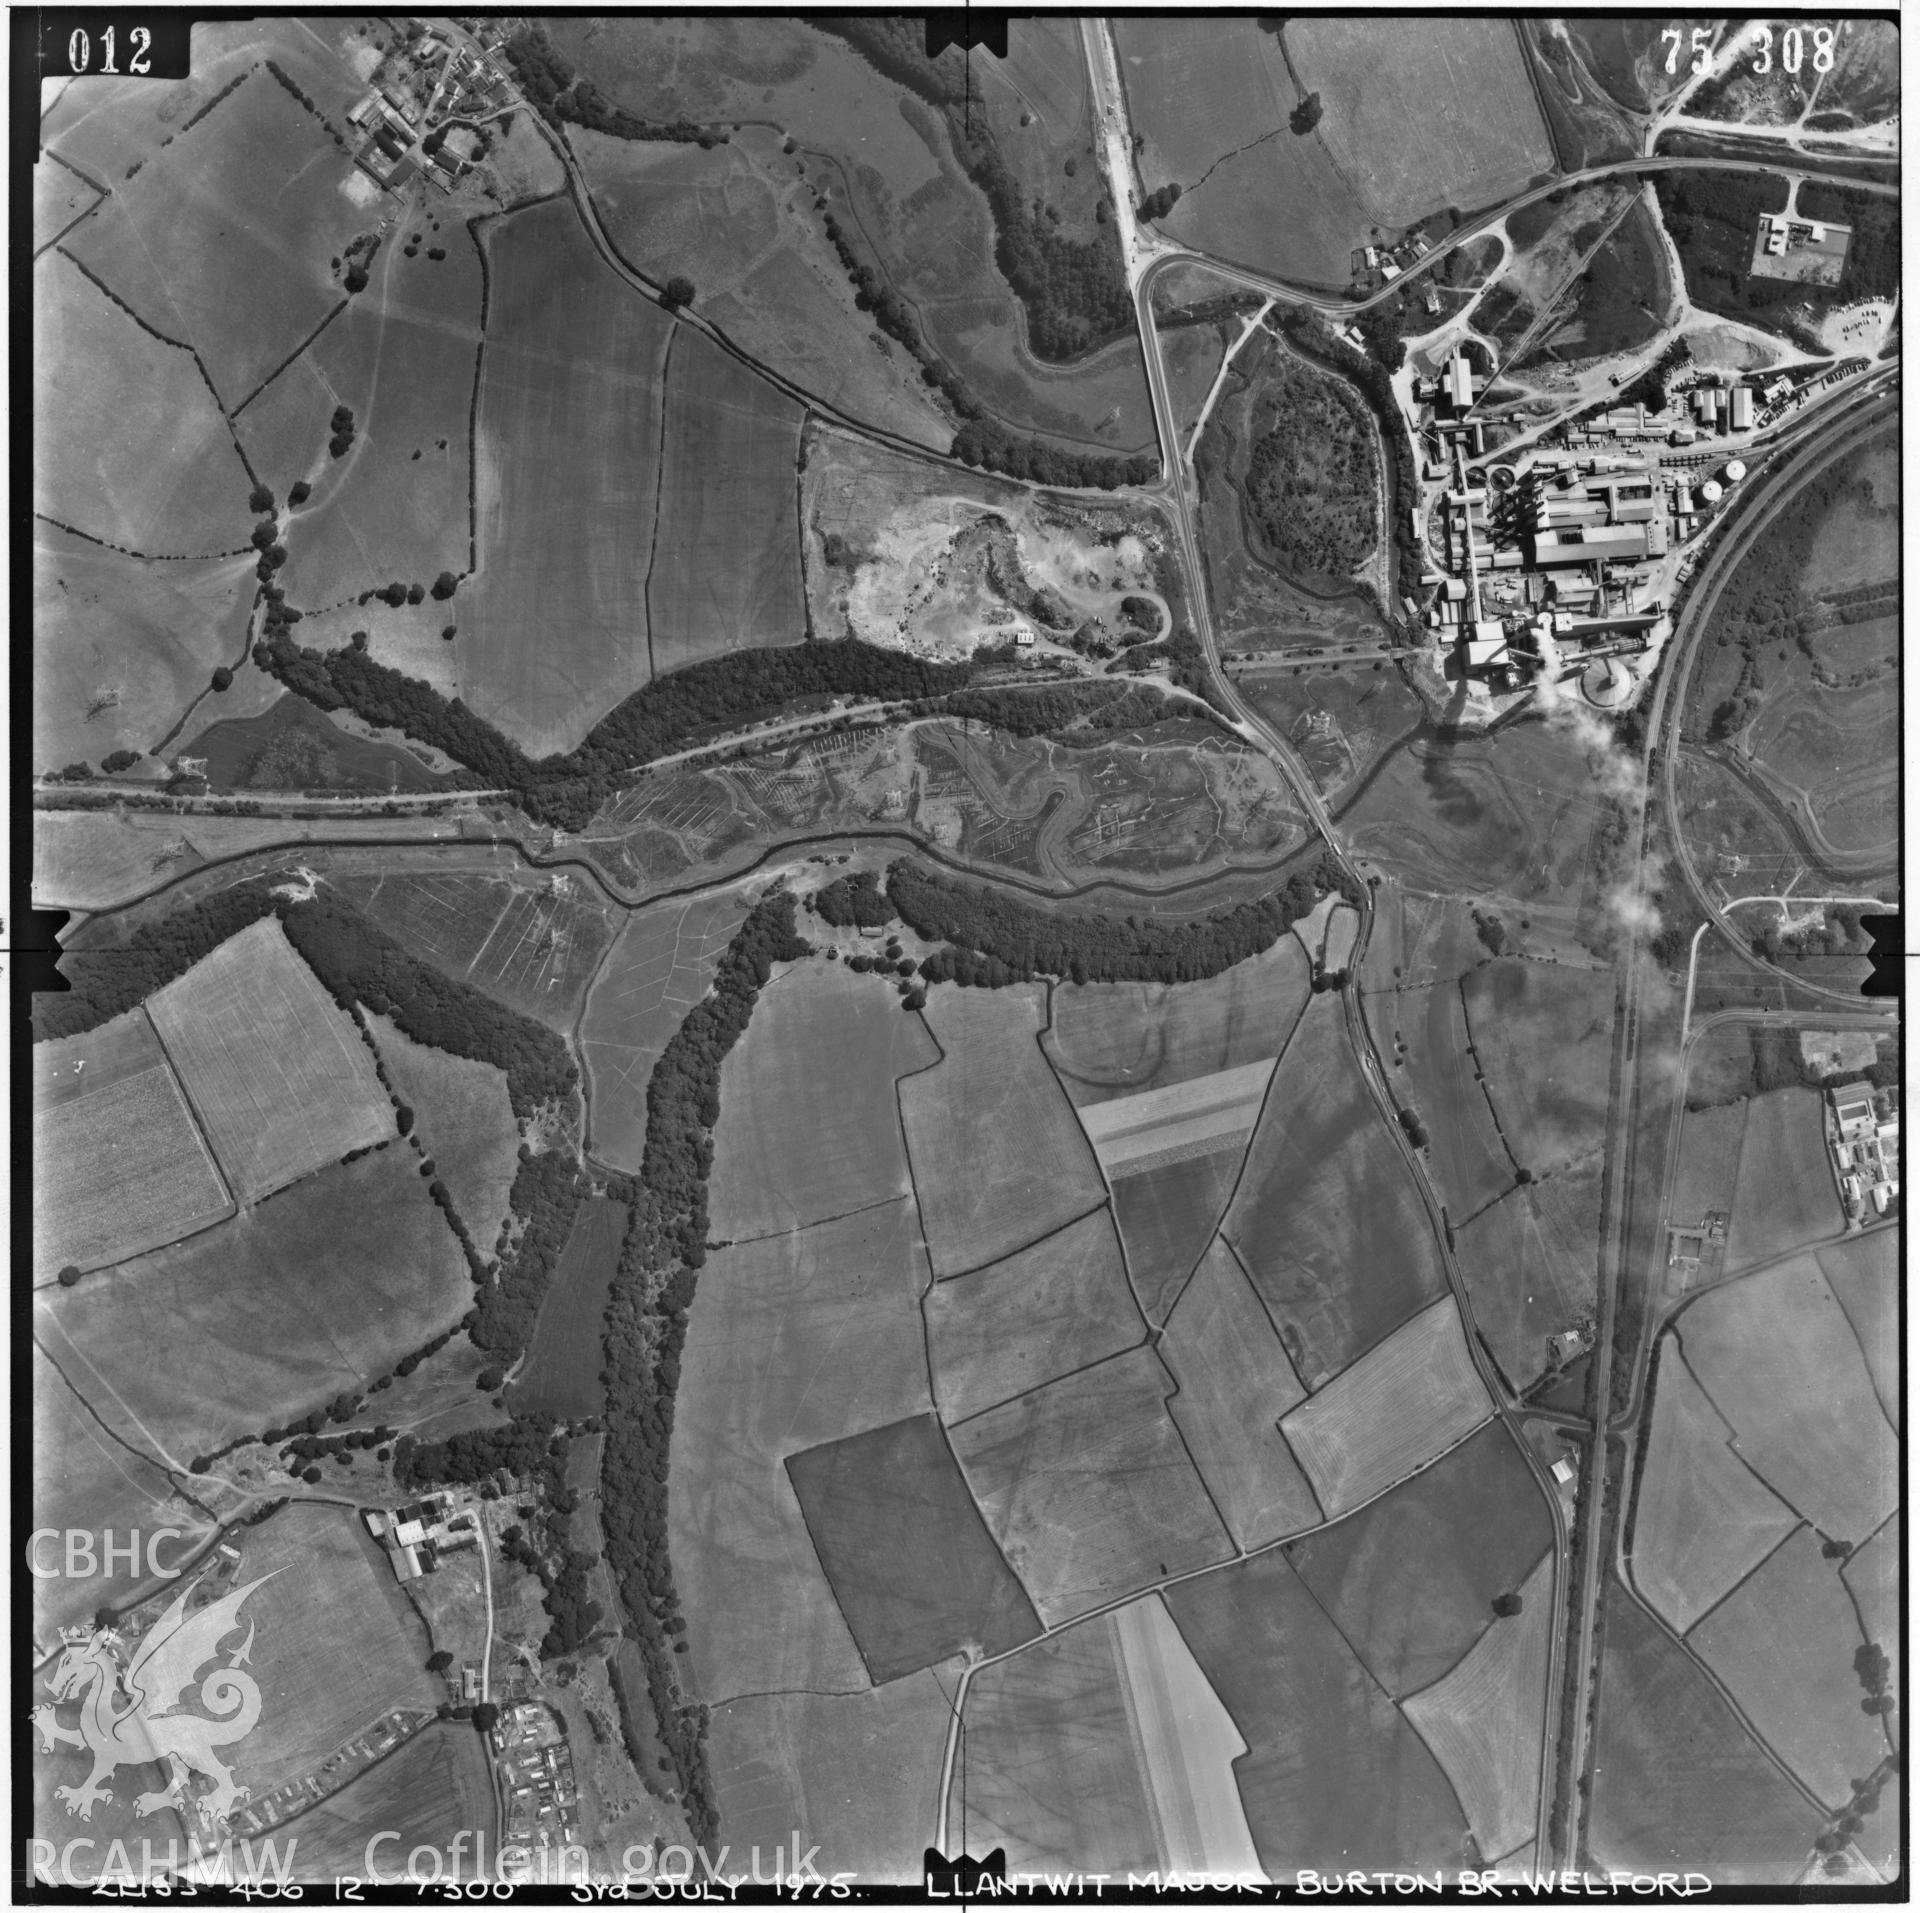 Digitized copy of an aerial photograph showing East Orchard Wood, Llantwit Major, taken by Ordnance Survey, 1975.